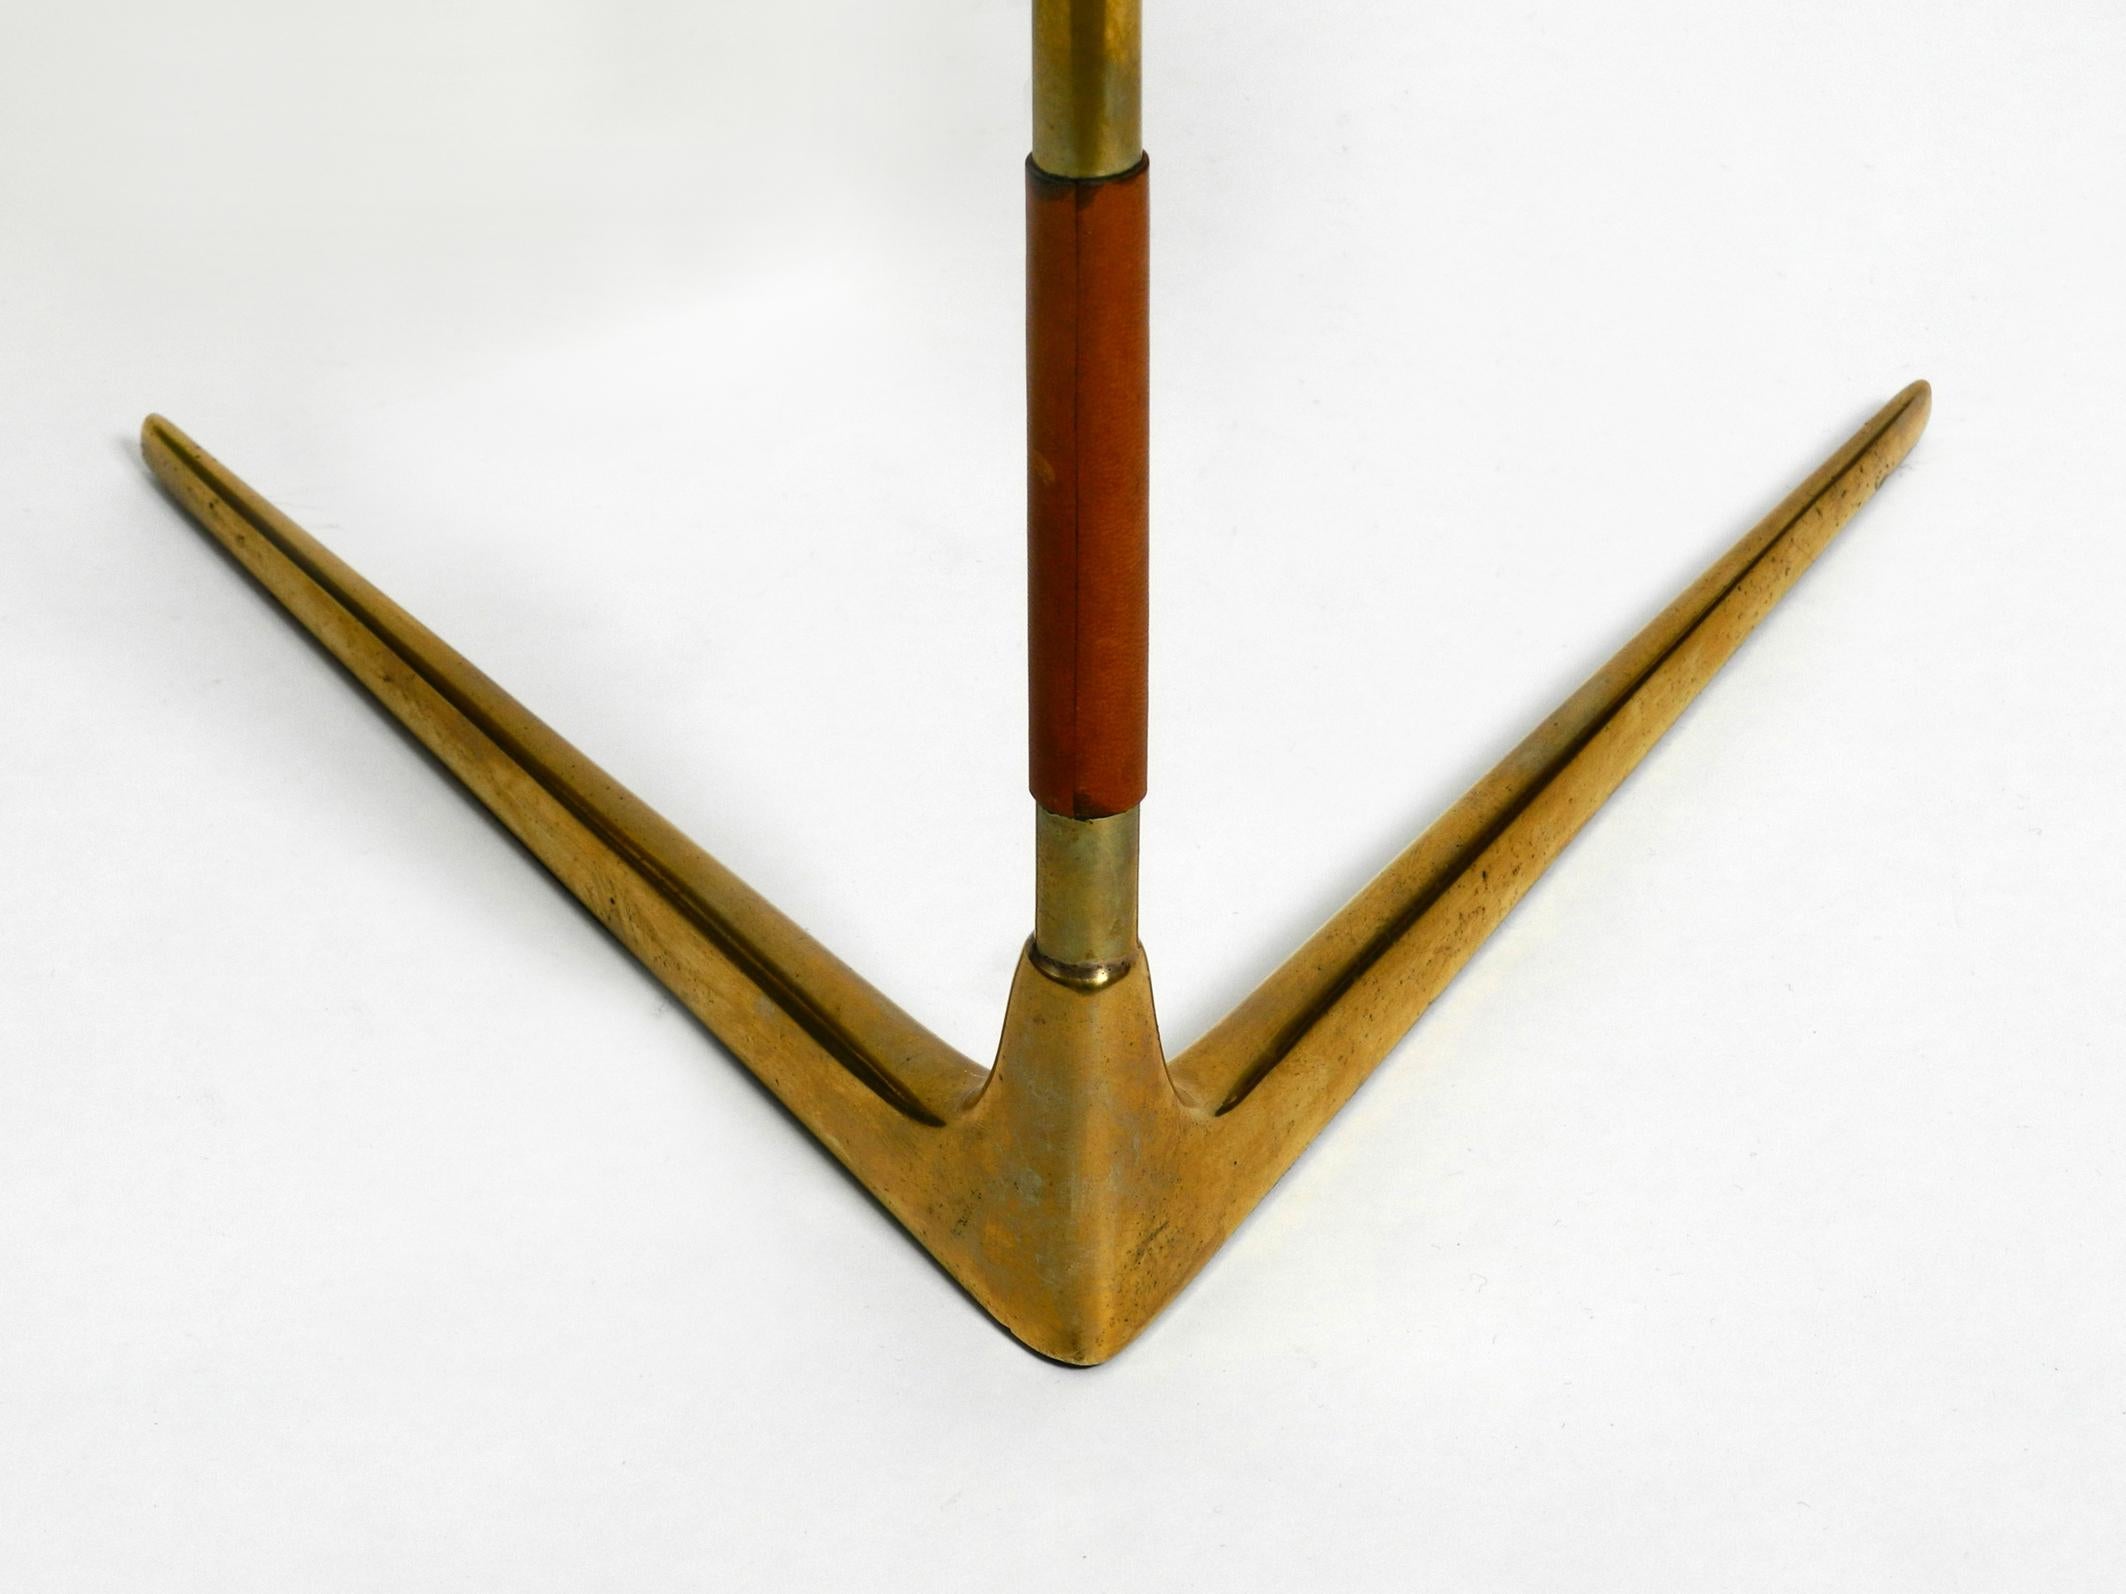 Large Italian Midcentury Crow's Foot Table Mirror Made of Brass and Leather 14